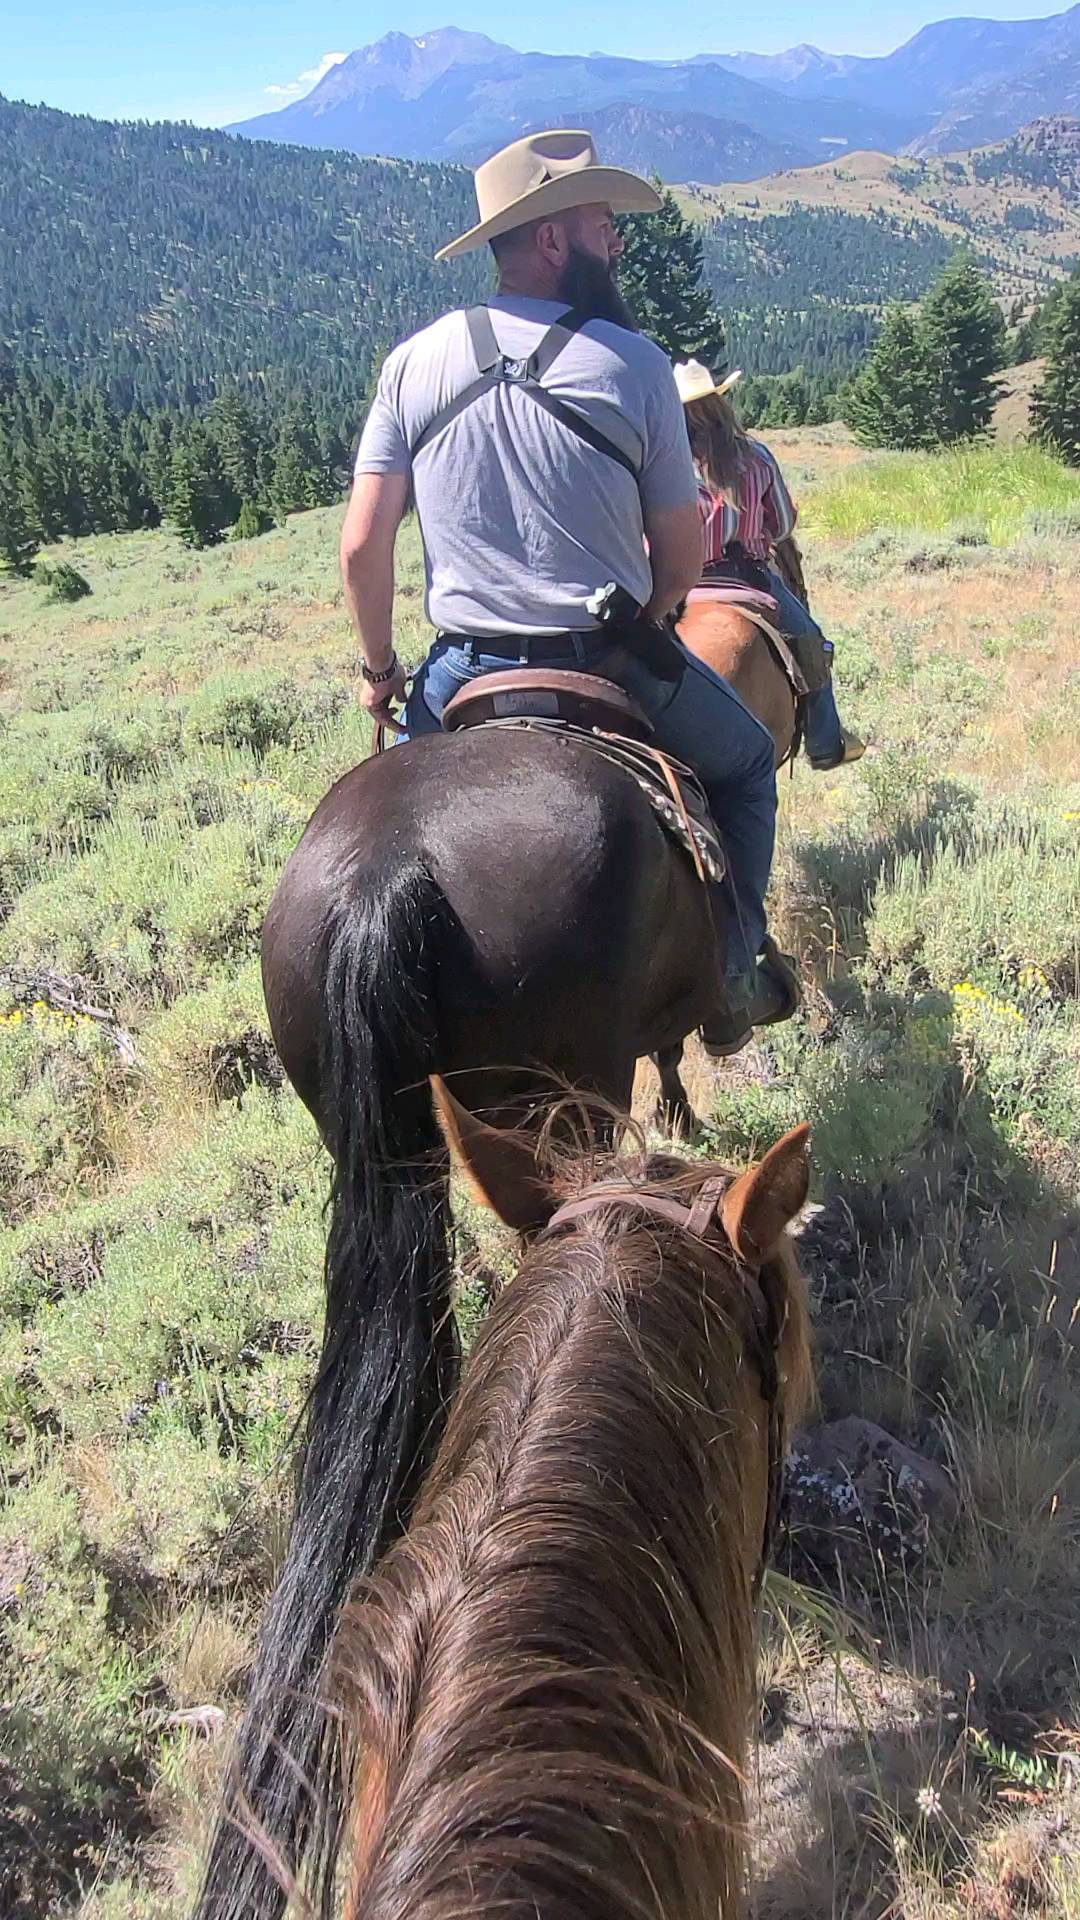 Checked a major item off my personal bucket list today 🙌 Montana is such a special place and somehow even more magical on horseback.

#montanamoment #duderanch #montanaranch #bucketlist #gramslayers #ranching #yellowstonecountry #doepicshit